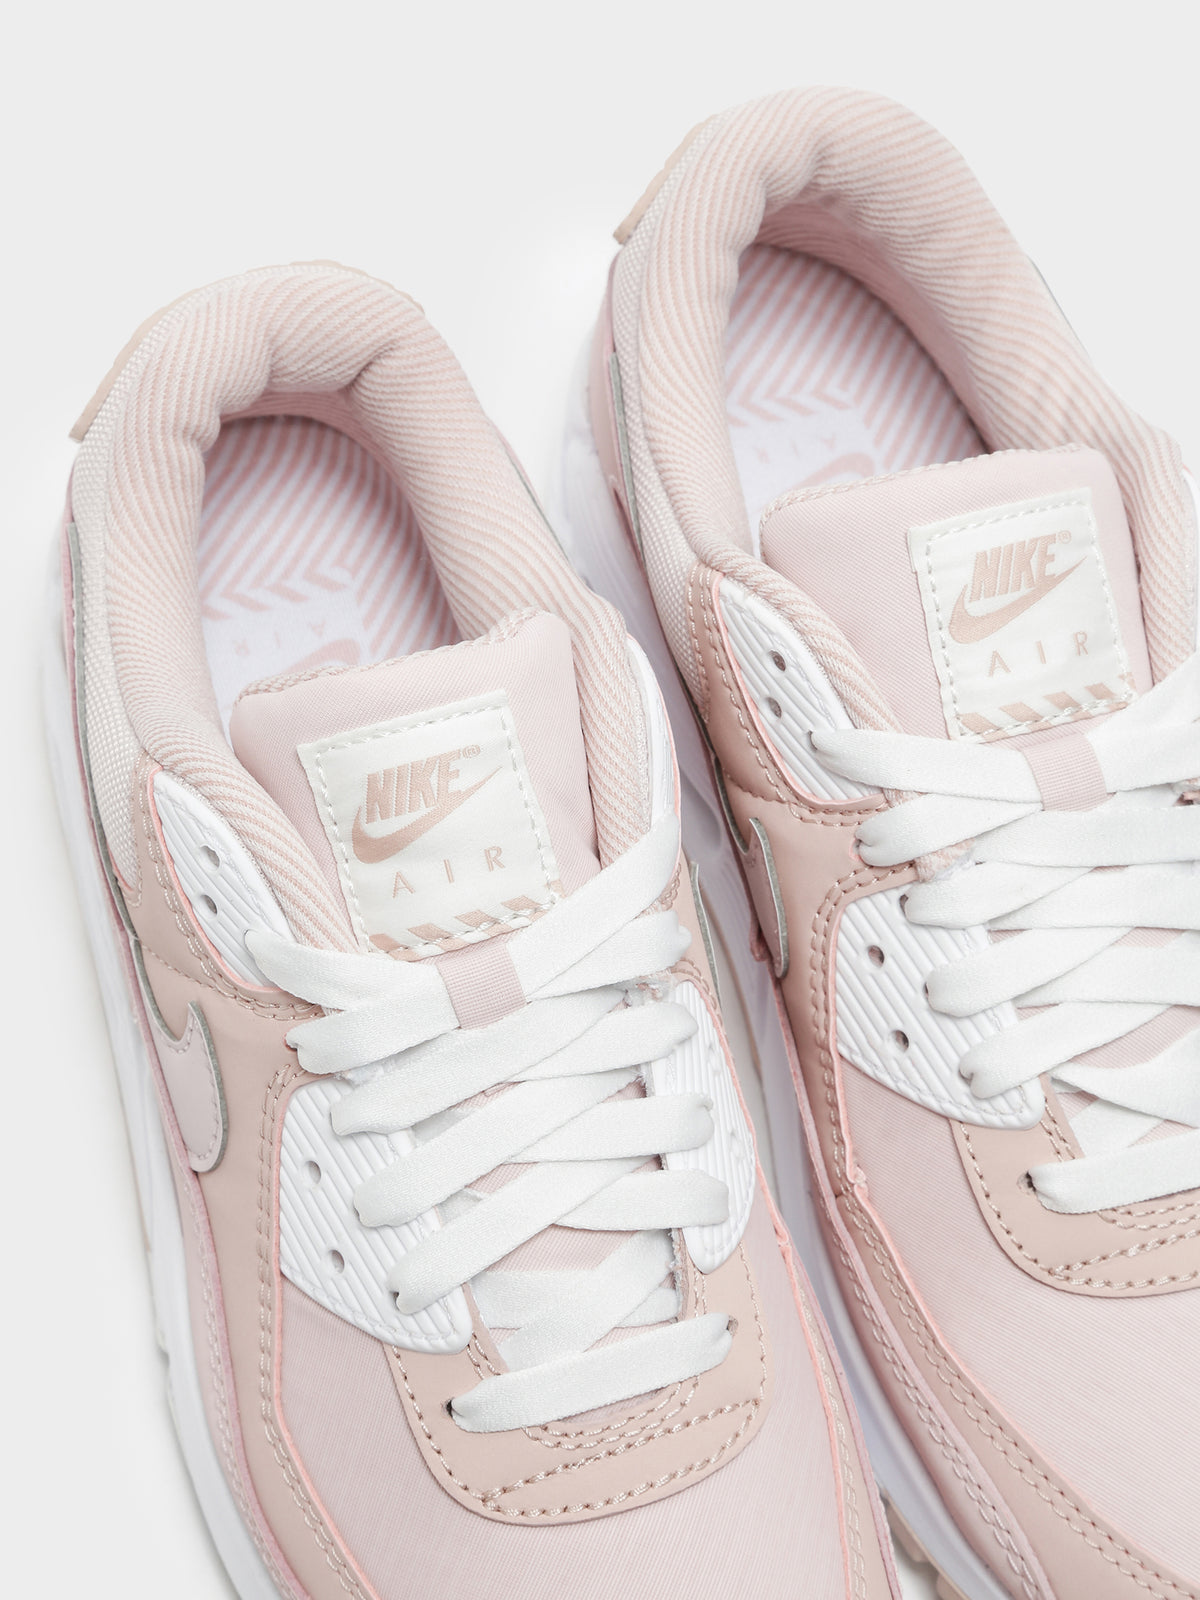 Womens Air Max 90 Sneakers in Barely Rose